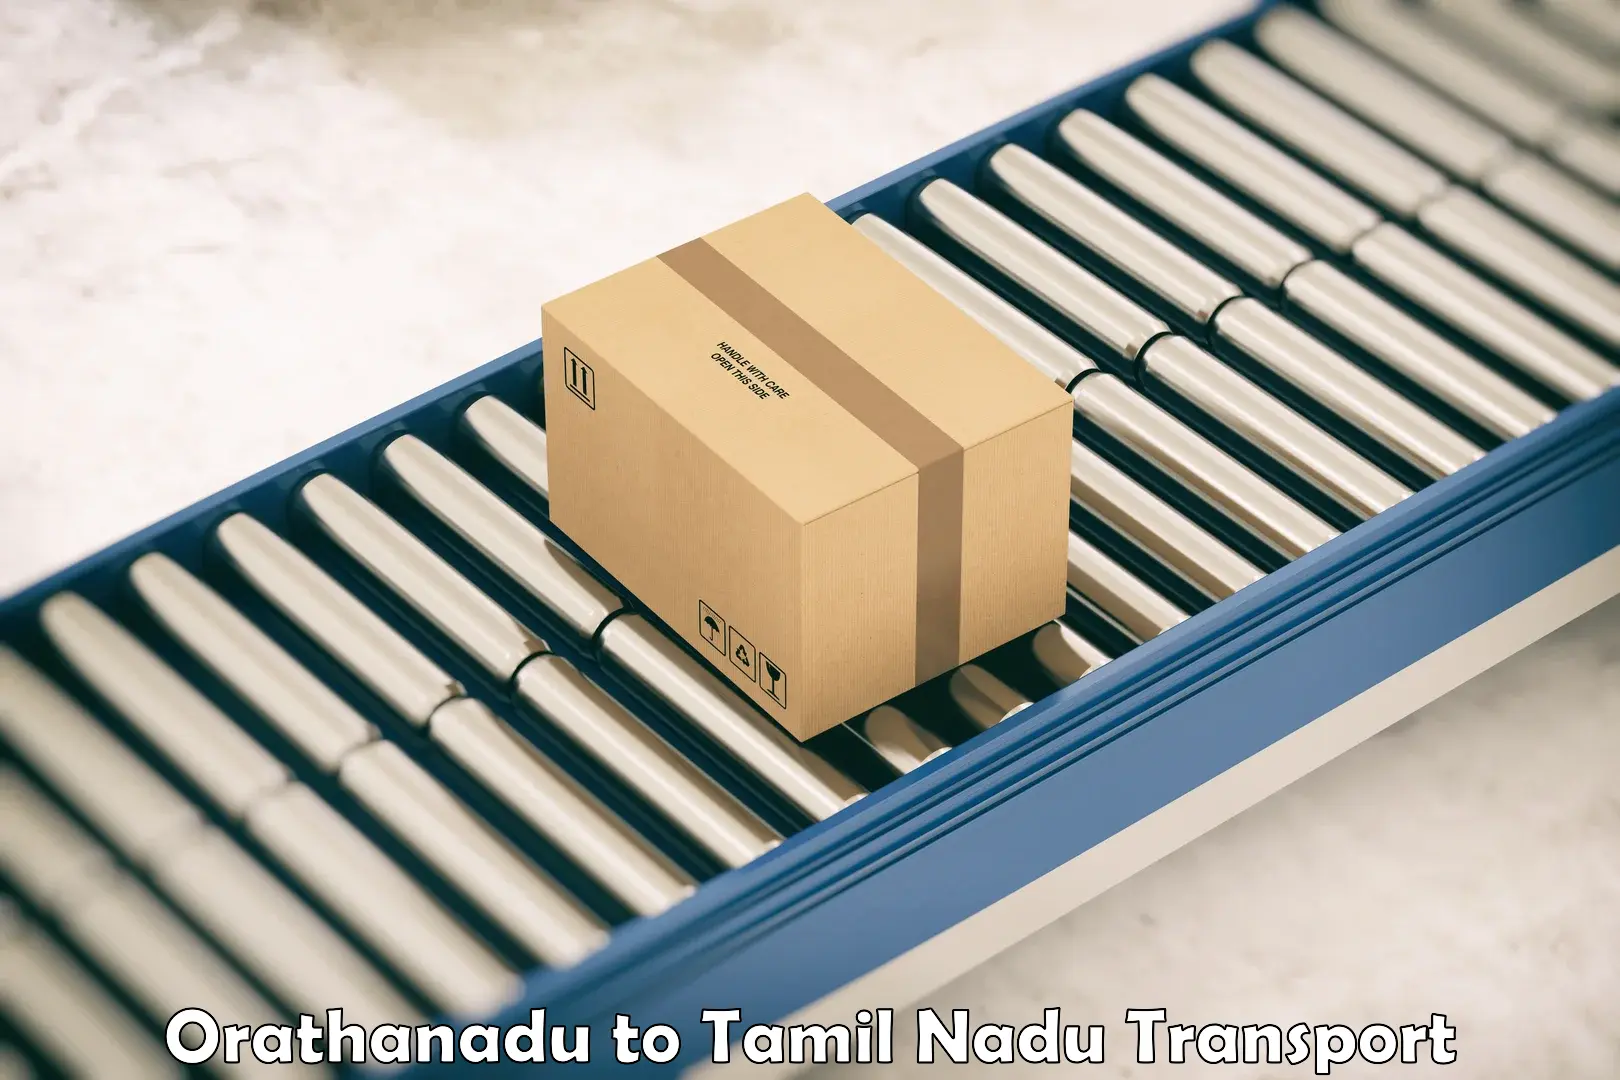 Logistics transportation services Orathanadu to Shanmugha Arts Science Technology and Research Academy Thanjavur